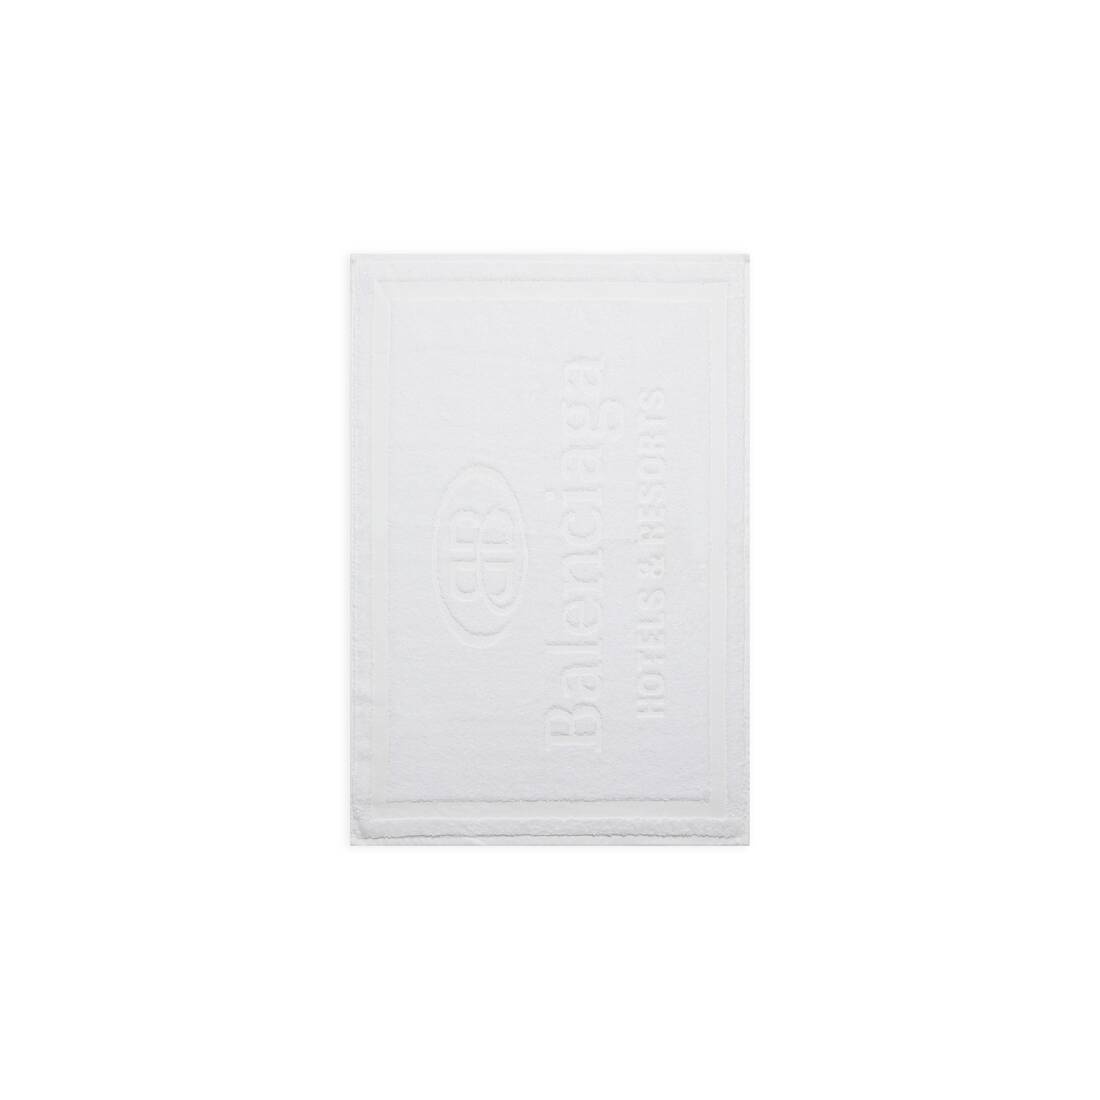 Hand Towel in White - 1